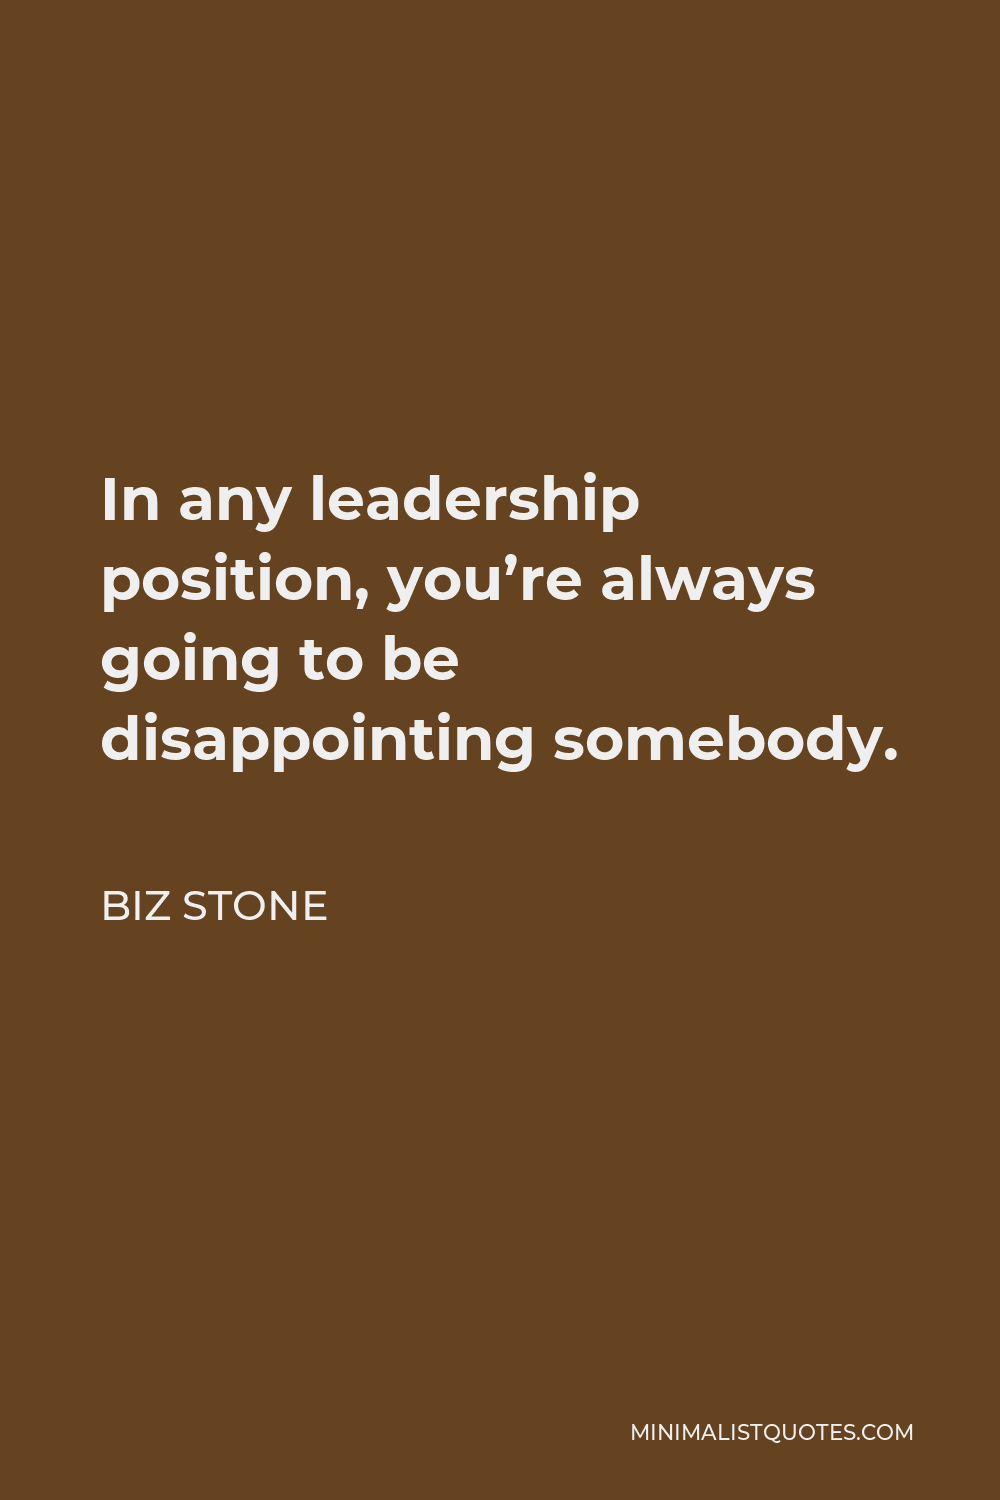 Biz Stone Quote - In any leadership position, you’re always going to be disappointing somebody.